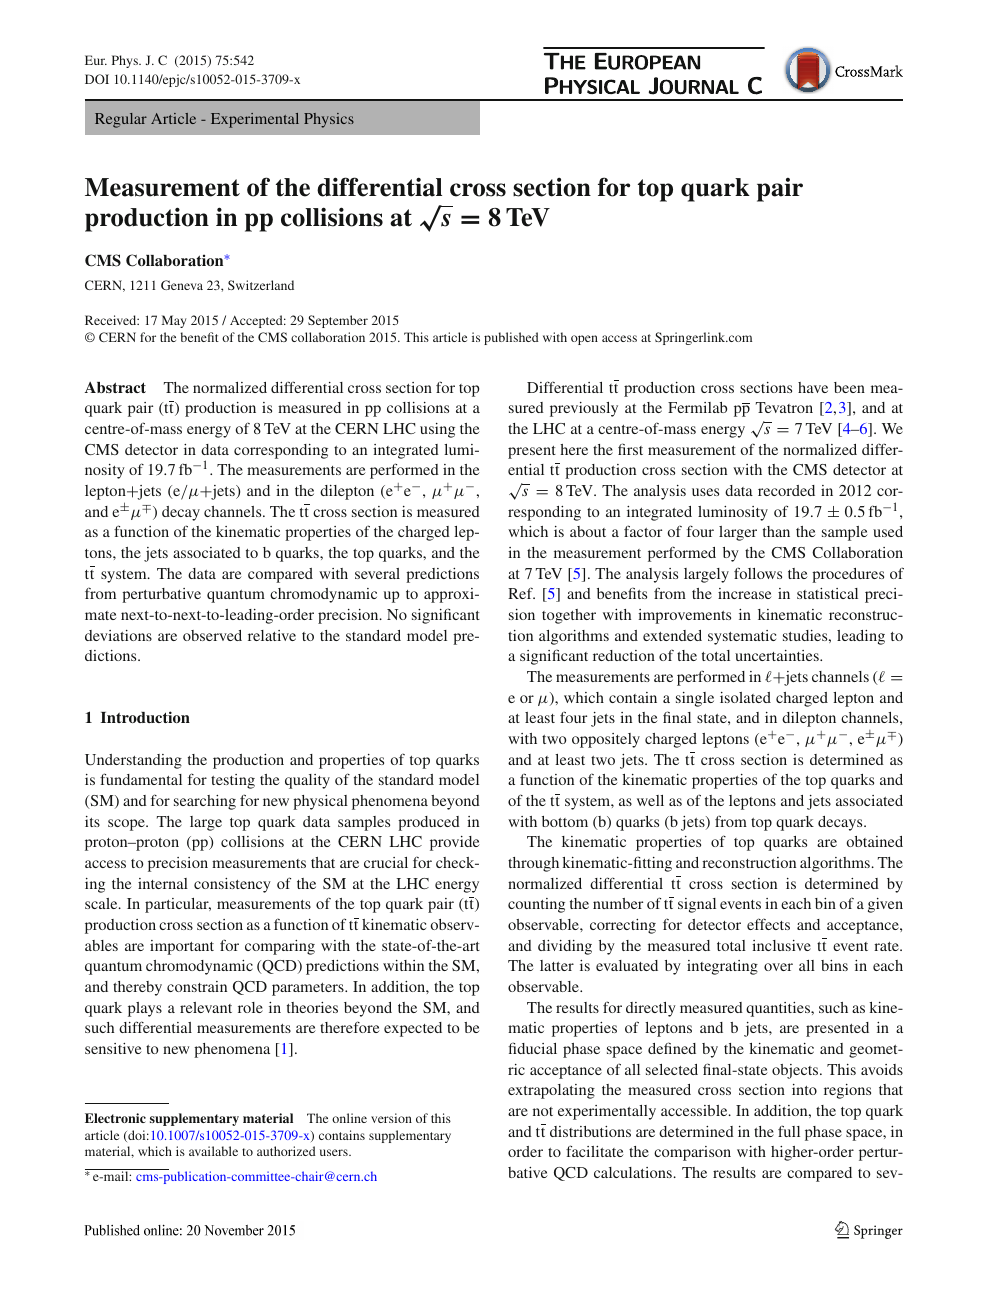 Measurement Of The Differential Cross Section For Top Quark Pair Production In Pp Collisions At Sqrt S 8 Text Tev S 8 Tev Topic Of Research Paper In Physical Sciences